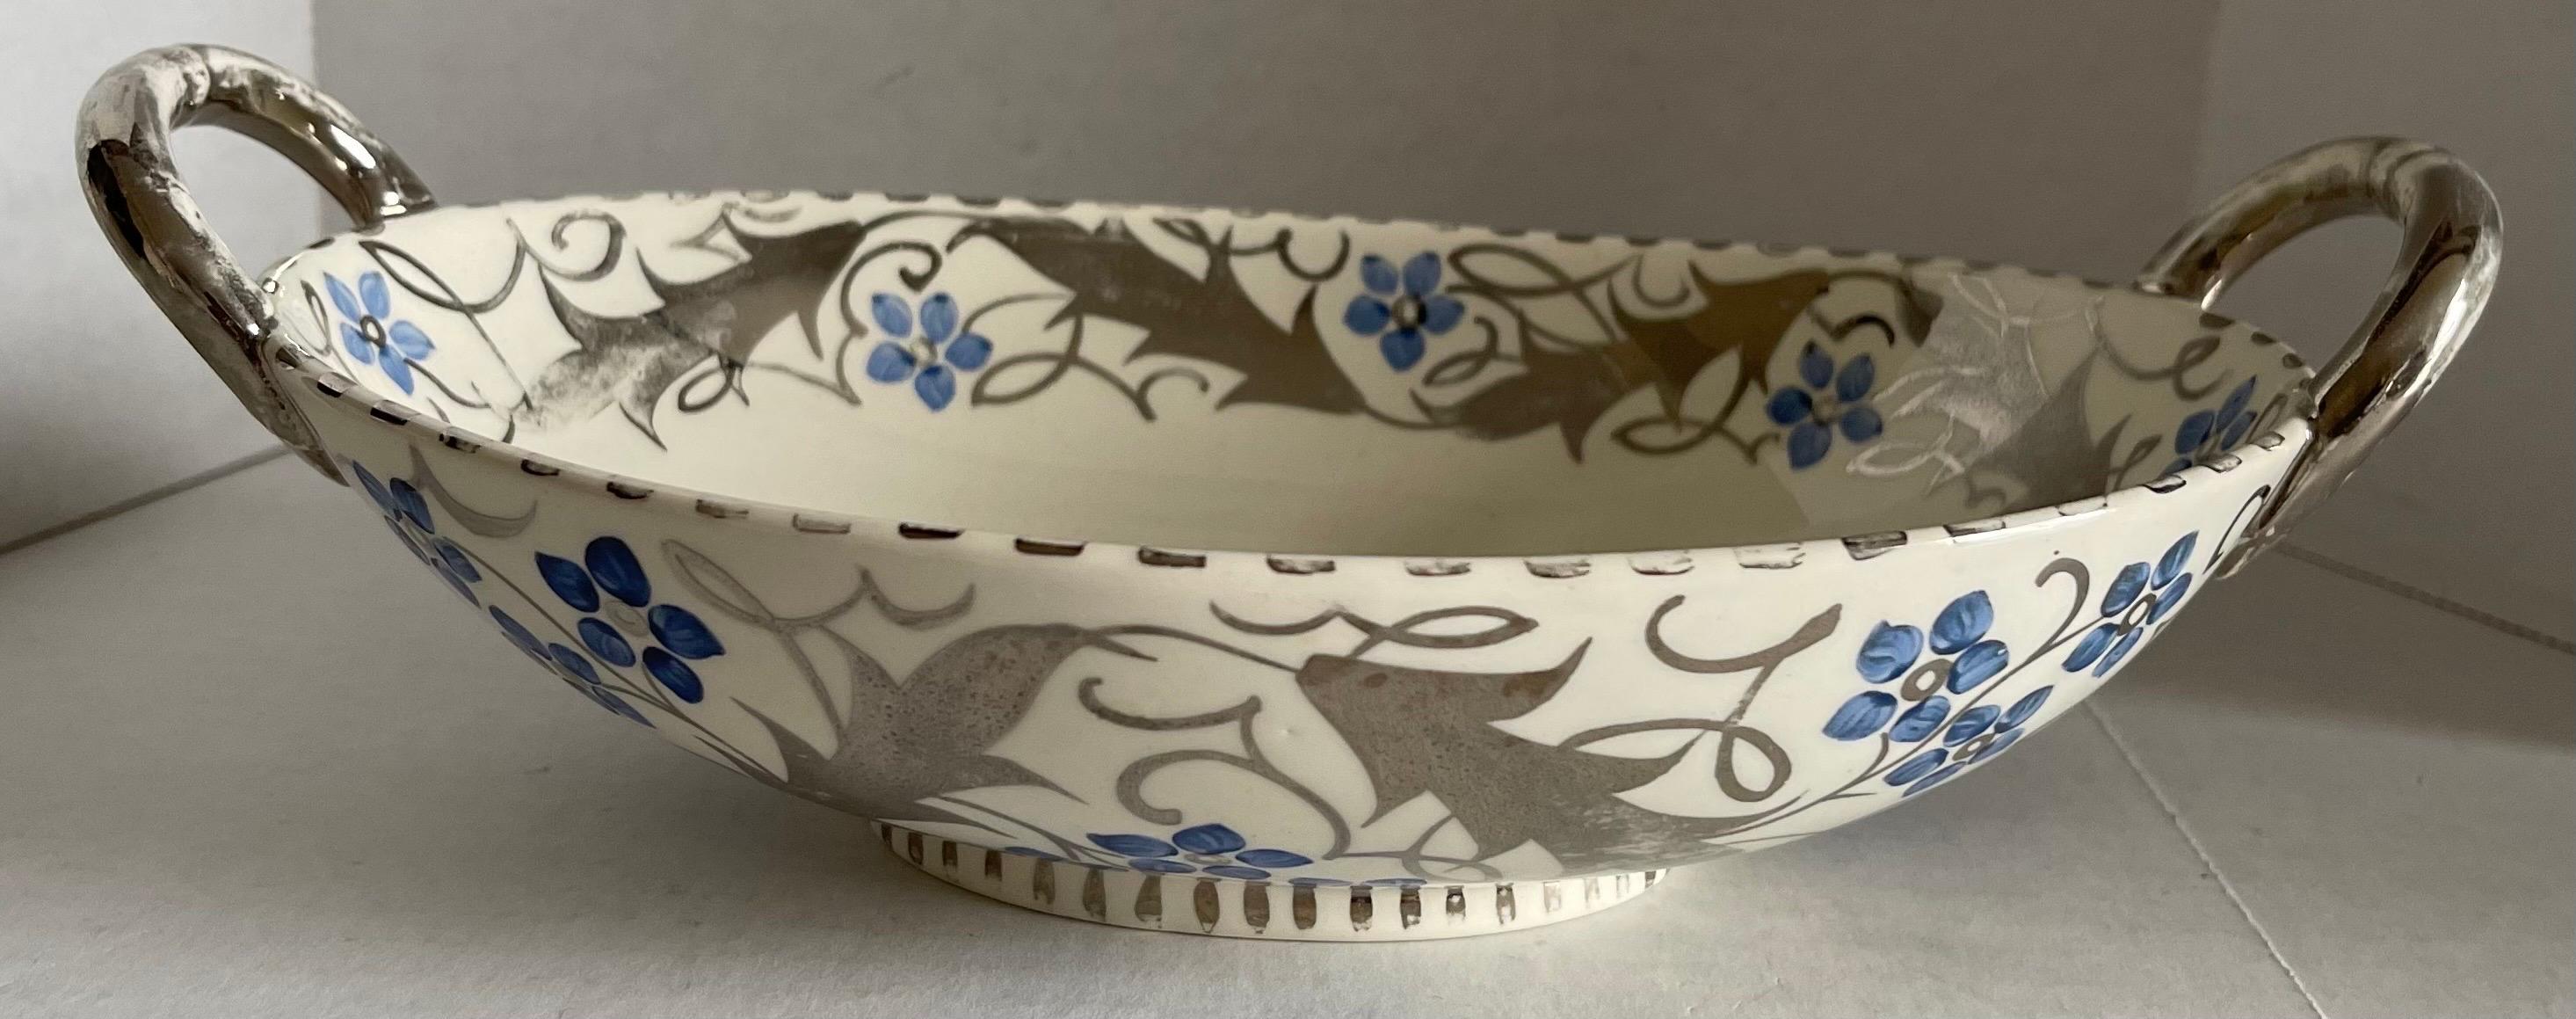 Antique 1930s Wedgwood lustre ware open basket. Bone China with hand painted silver and blue floral design. Brand stamp on the underside. 